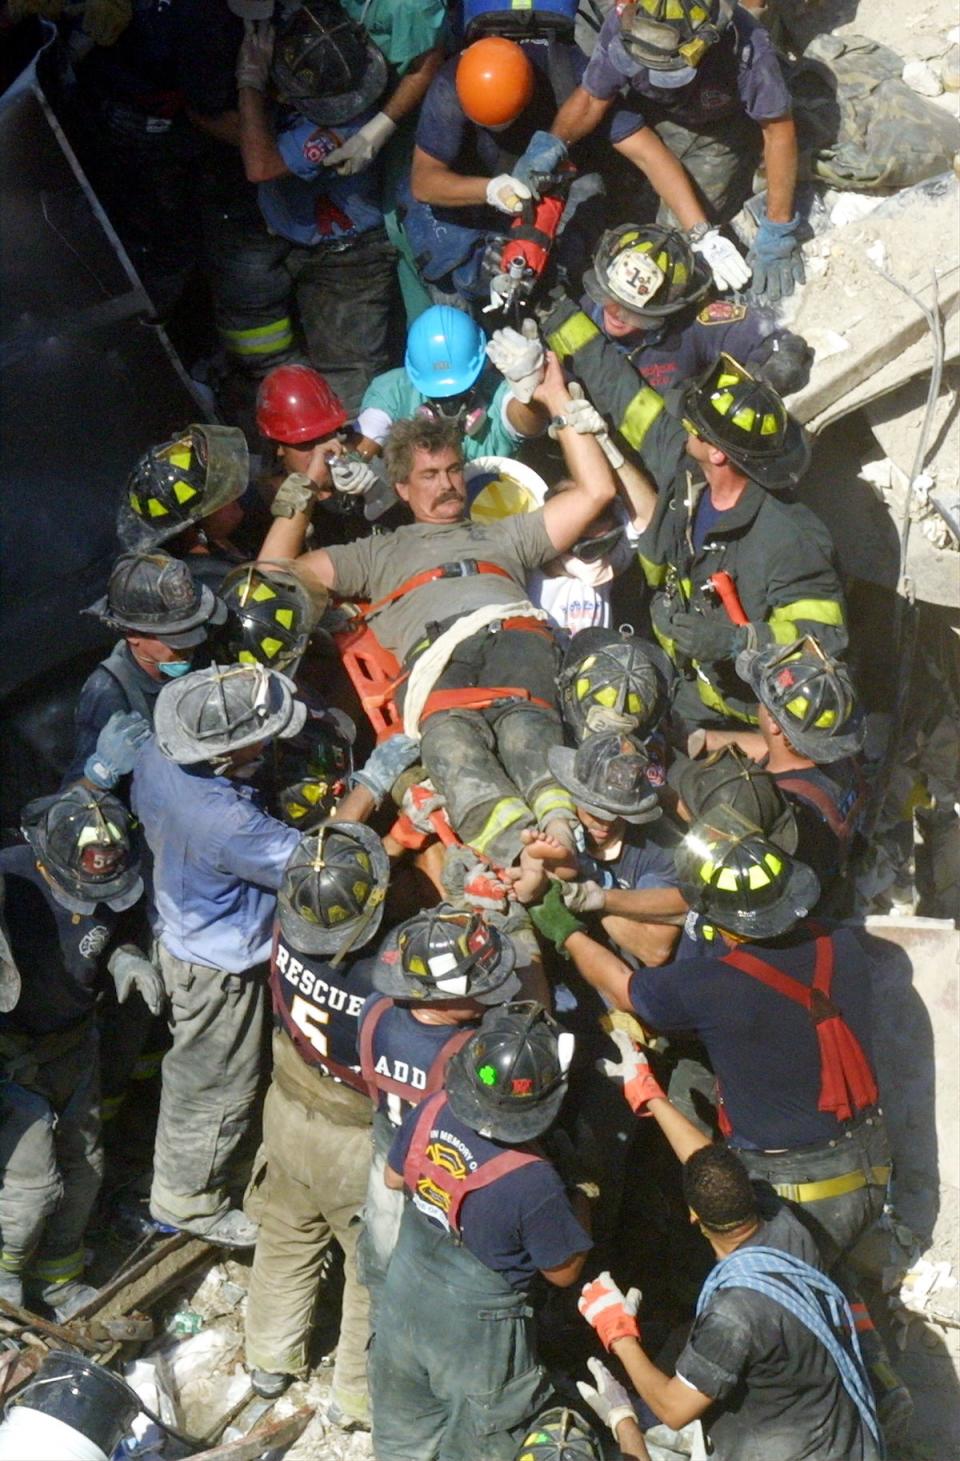 A rescue worker is pulled from the rubble (Getty)